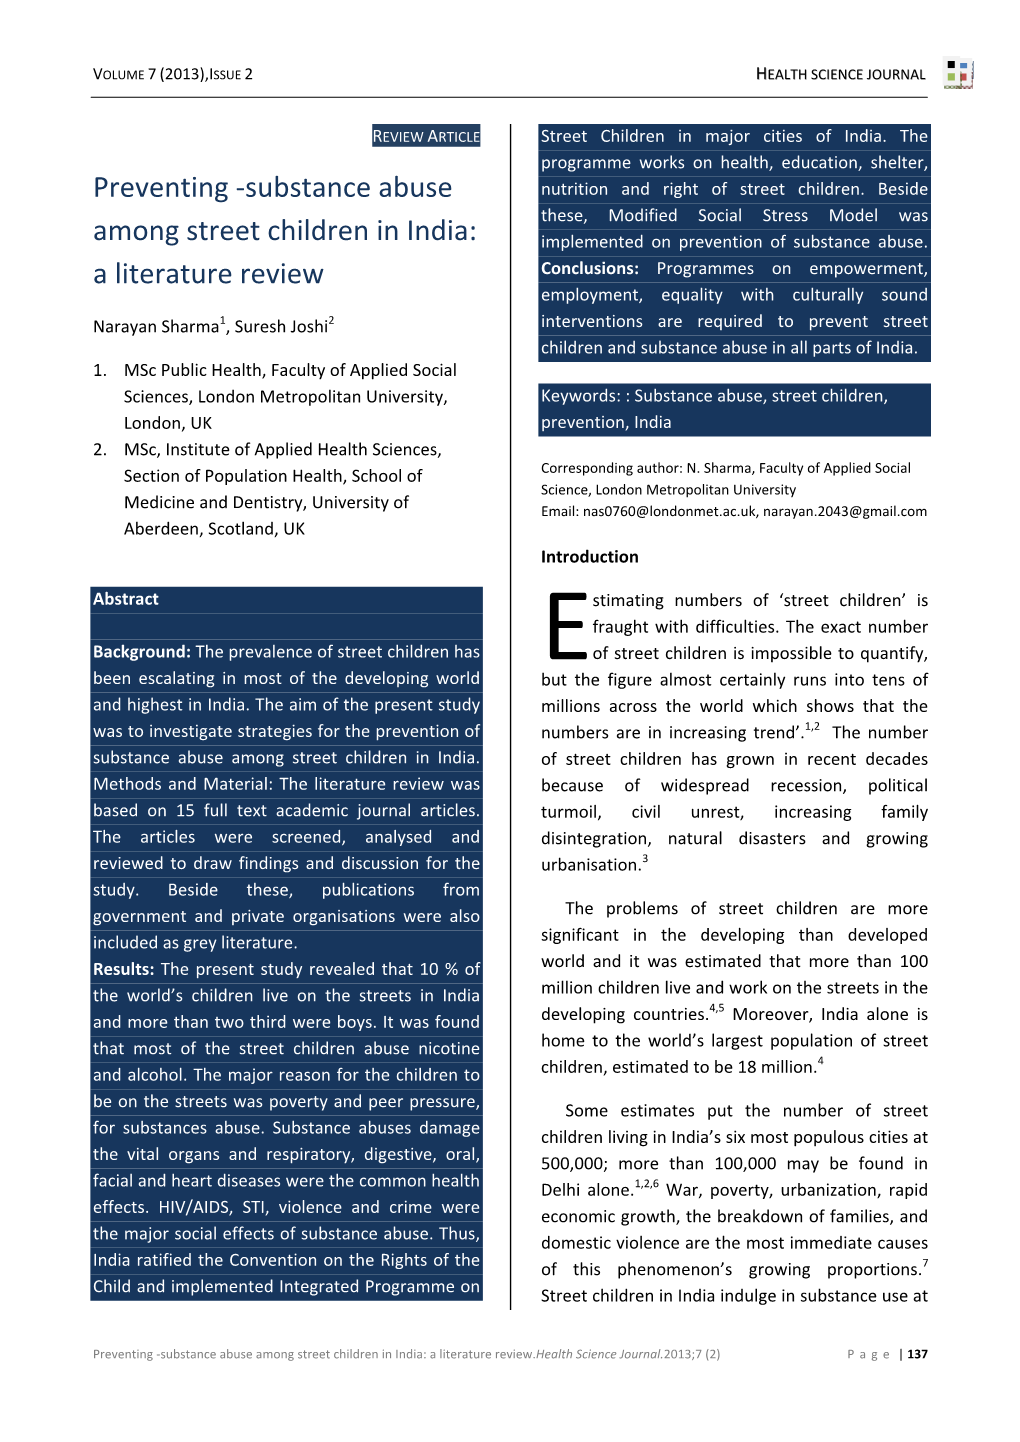 Substance Abuse Among Street Children in India: a Literature Review